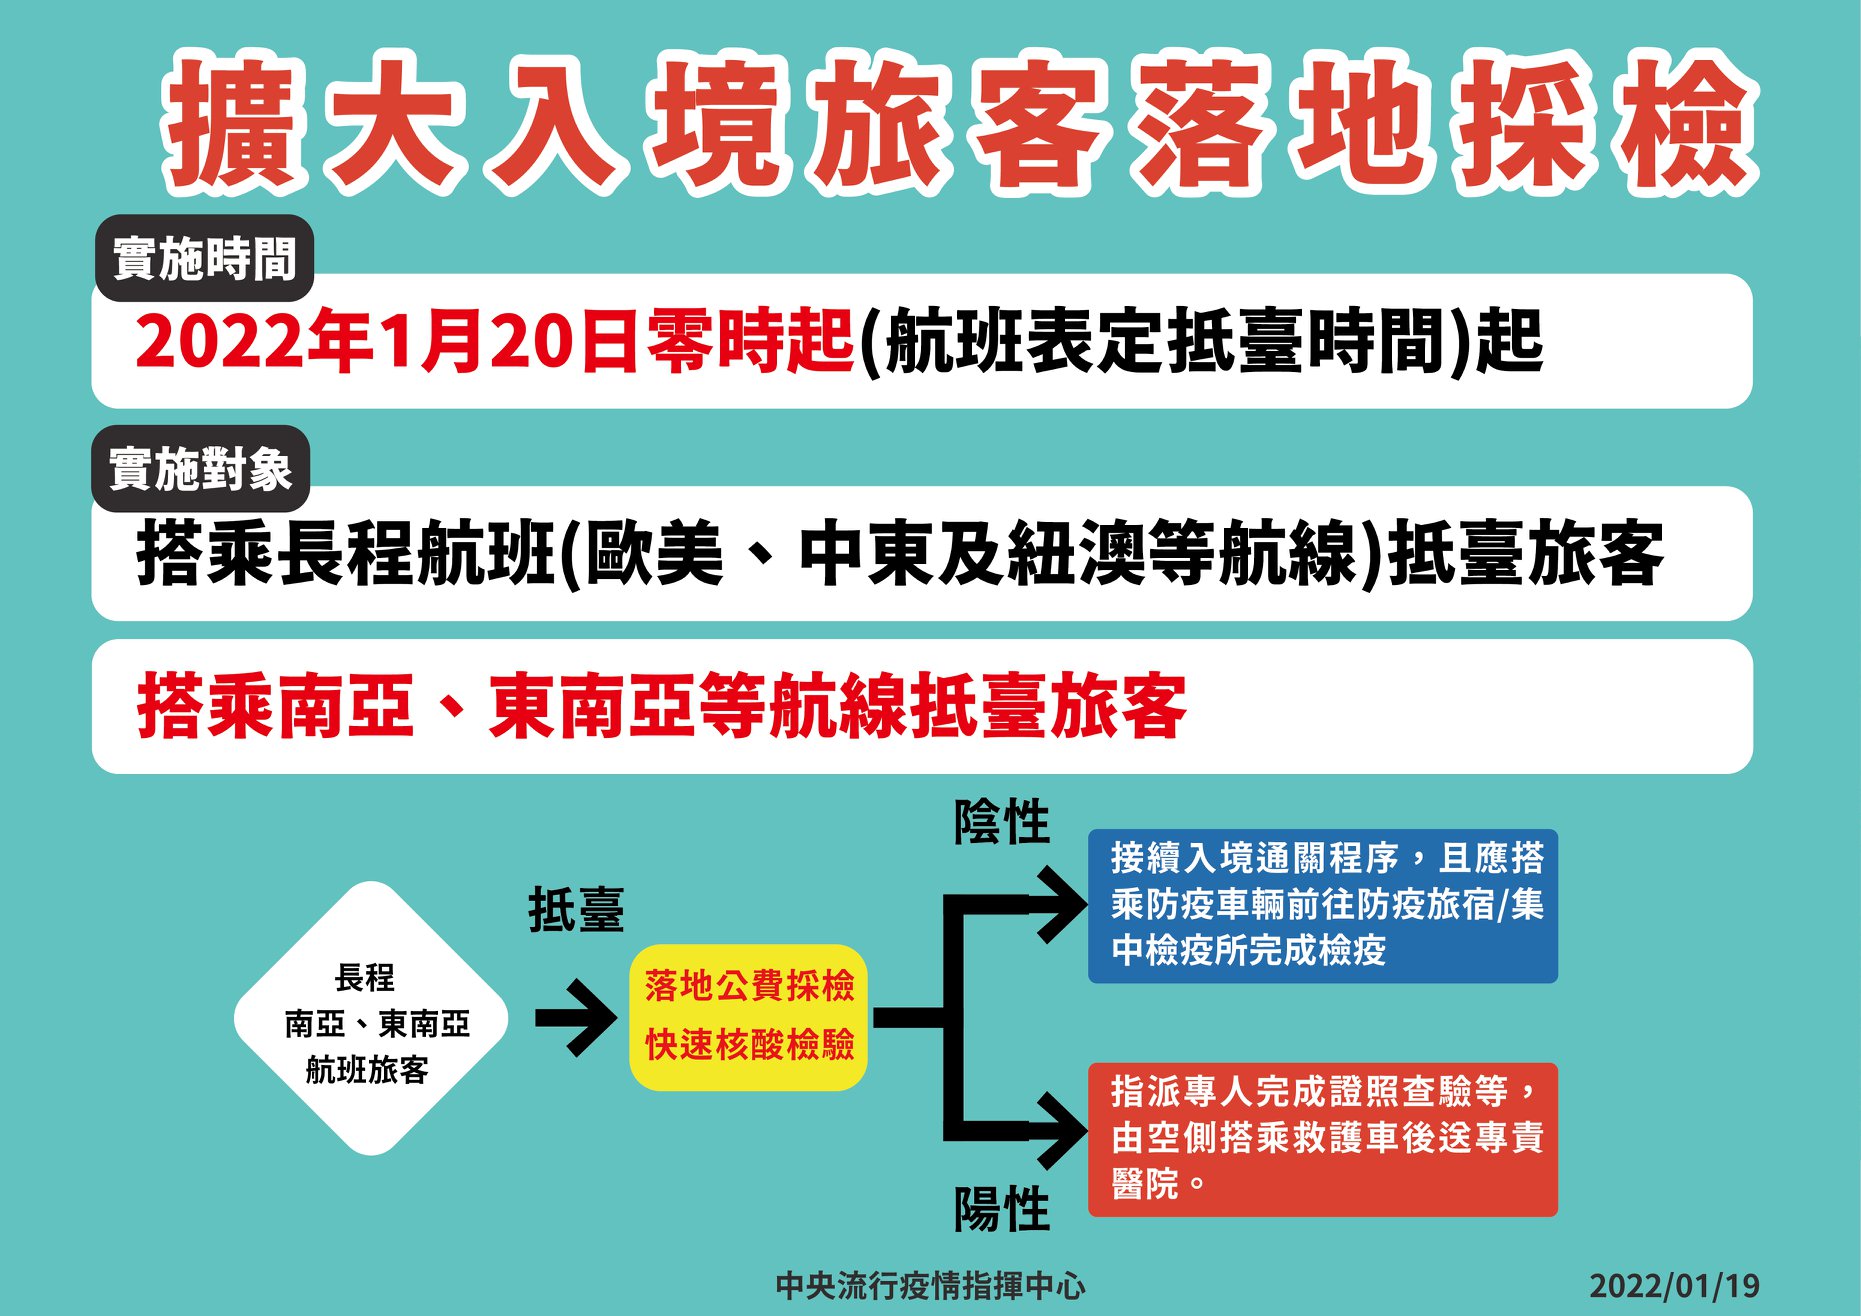 Those testing positive will be transported to a designated hospital or a government quarantine facility. (Photo / Provided by Taiwan Centers for Disease Control)